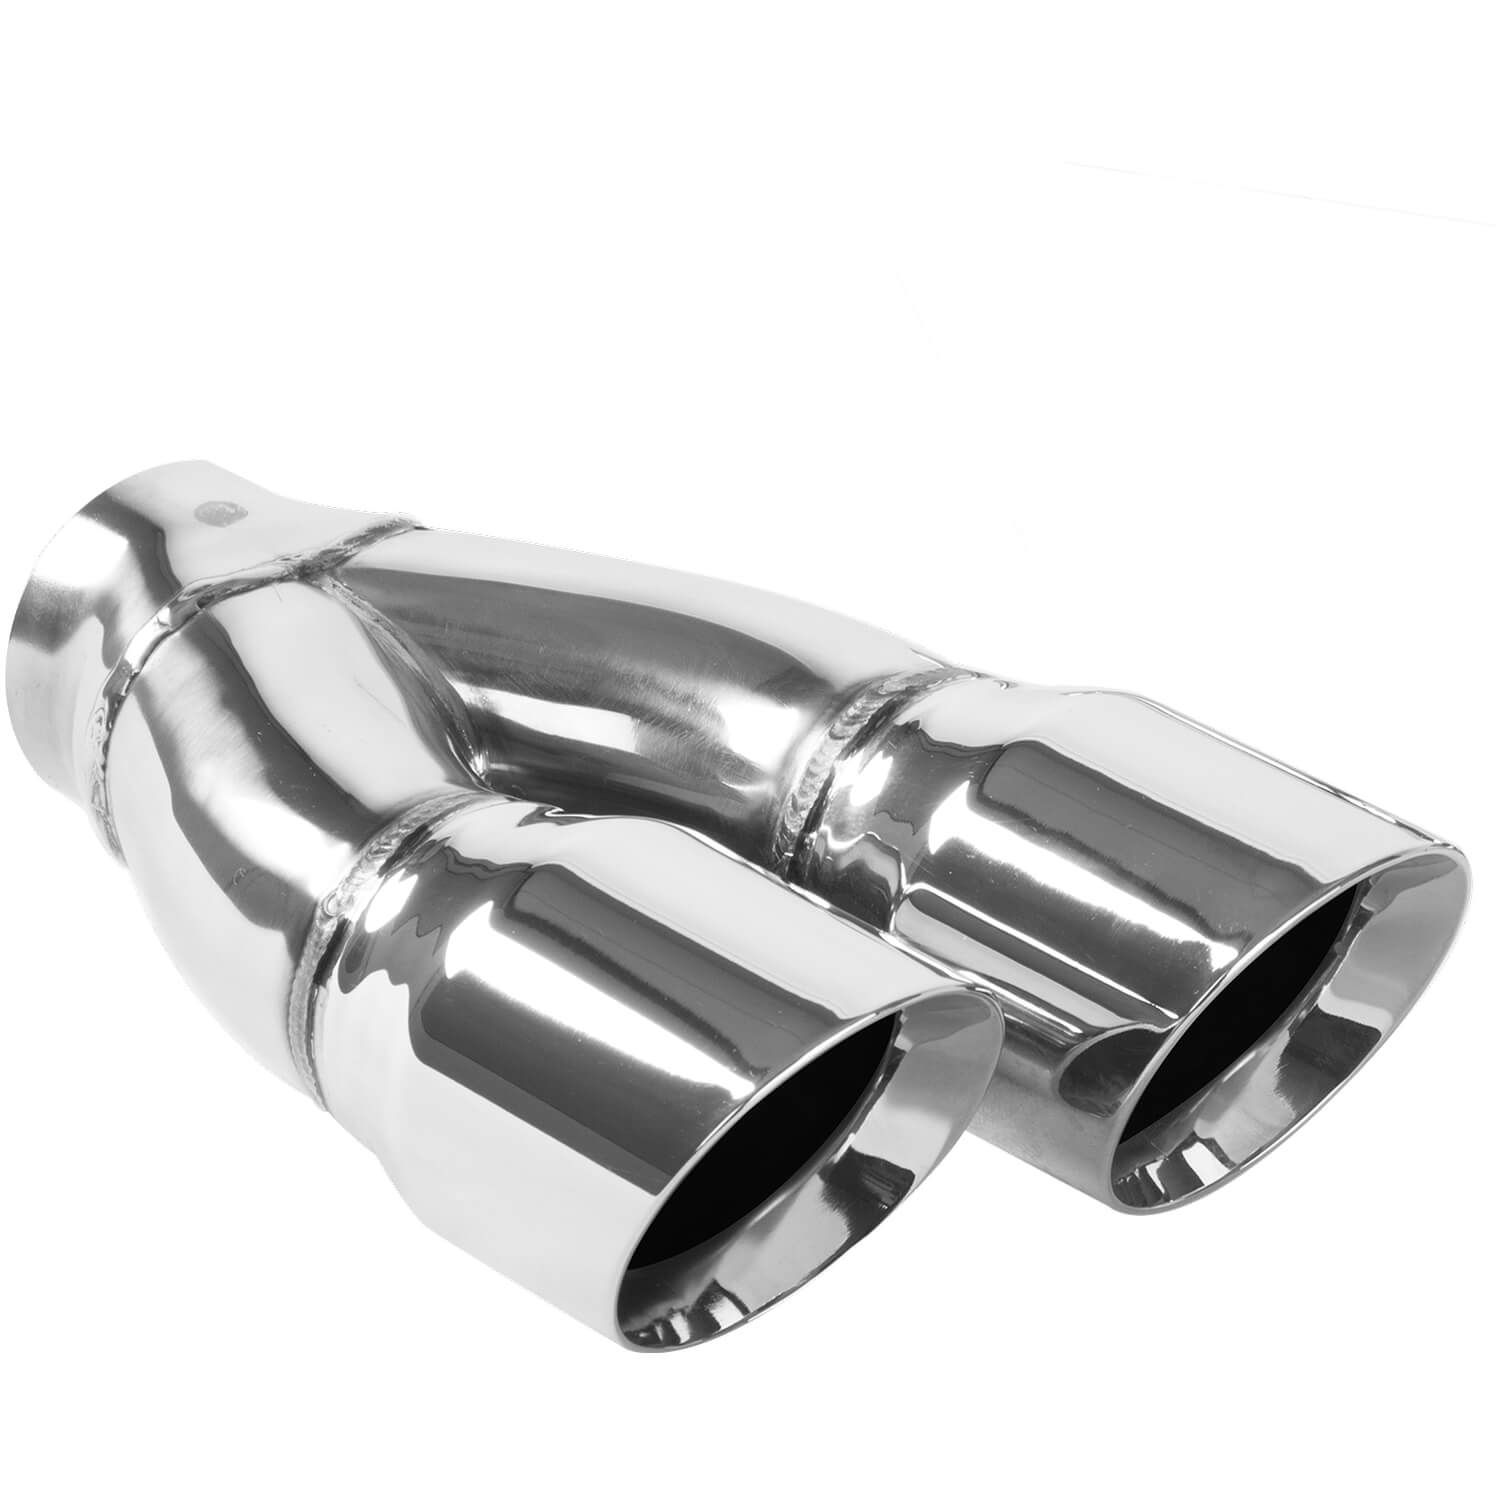 Polished Stainless Steel Weld-On Dual Exhaust Tip Inlet Inside Diameter: 2.25"